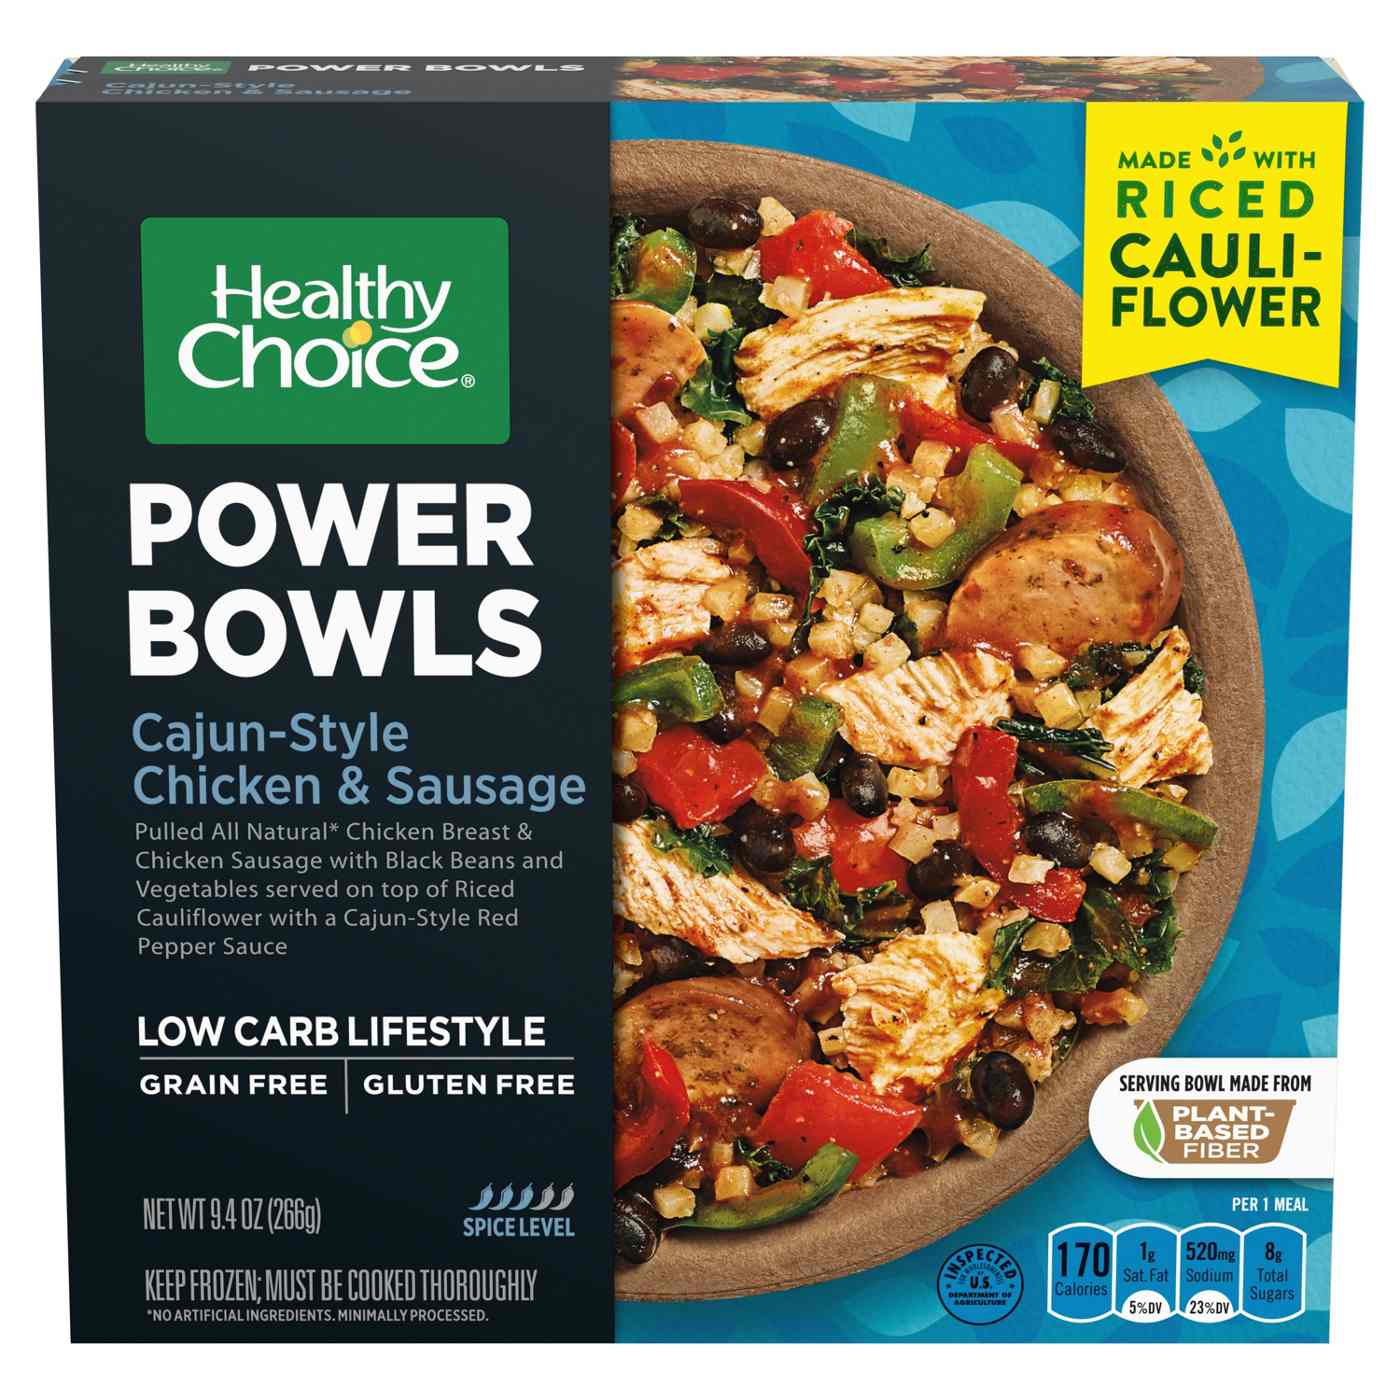 Healthy Choice Power Bowls Cajun-Style Chicken & Sausage Frozen Meal; image 1 of 7